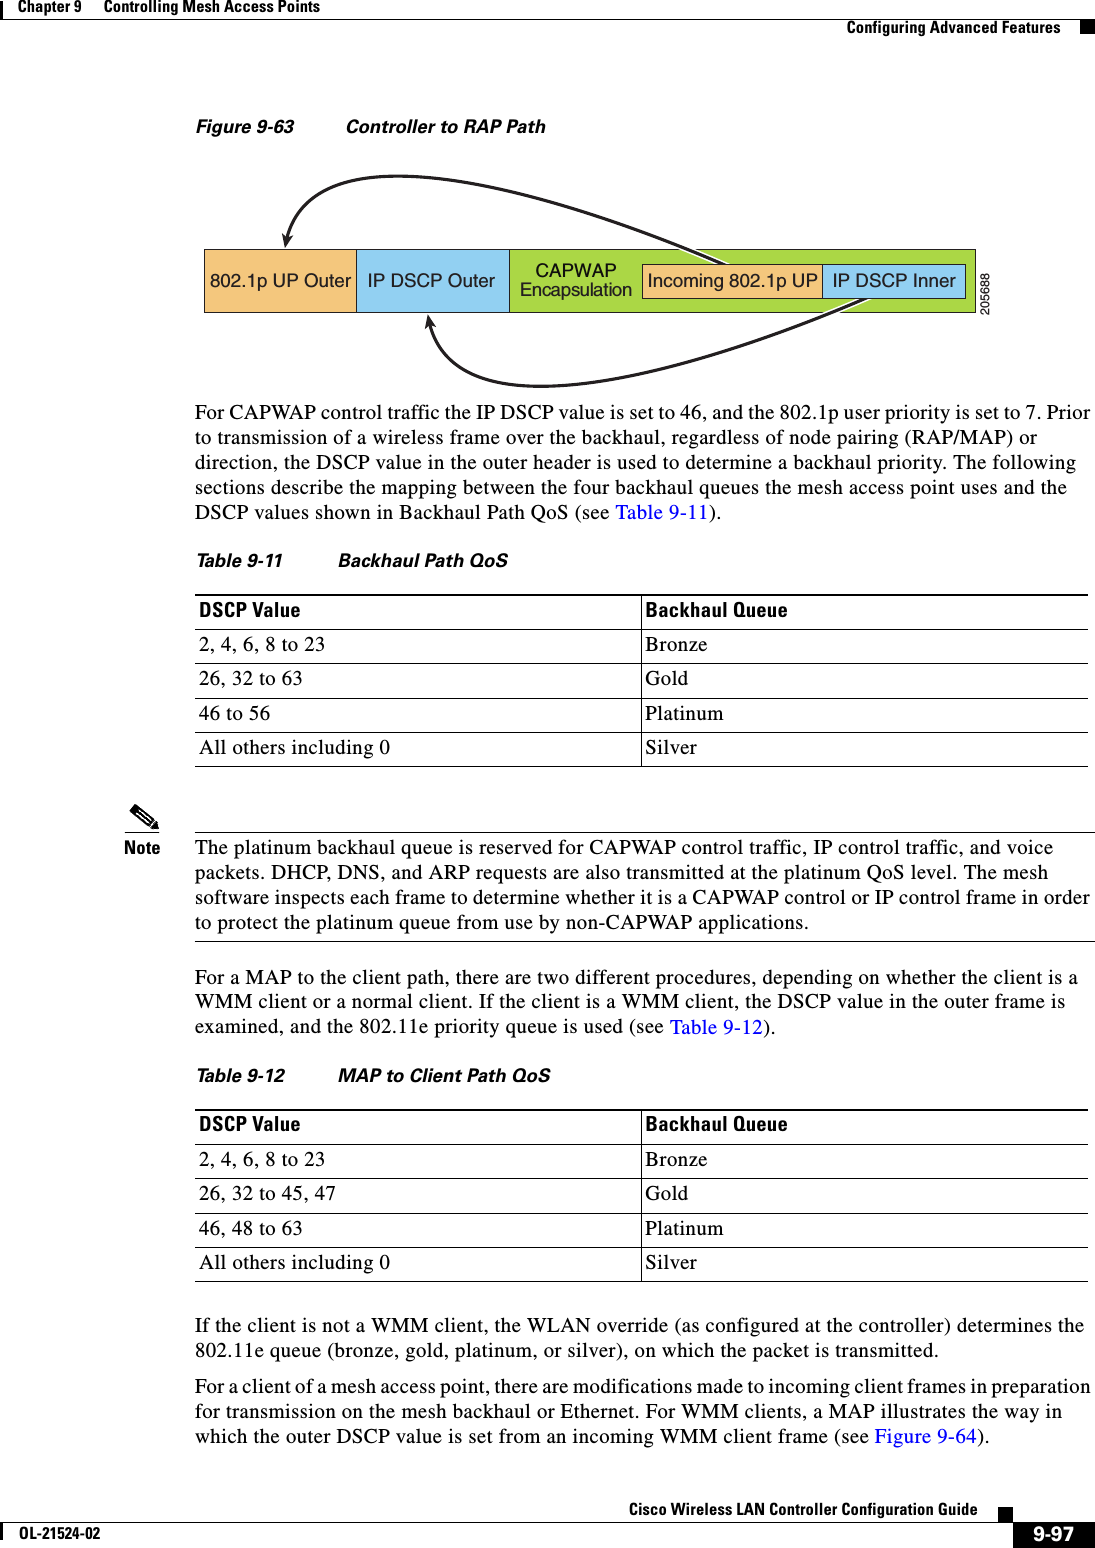  9-97Cisco Wireless LAN Controller Configuration GuideOL-21524-02Chapter 9      Controlling Mesh Access Points  Configuring Advanced FeaturesFigure 9-63 Controller to RAP PathFor CAPWAP control traffic the IP DSCP value is set to 46, and the 802.1p user priority is set to 7. Prior to transmission of a wireless frame over the backhaul, regardless of node pairing (RAP/MAP) or direction, the DSCP value in the outer header is used to determine a backhaul priority. The following sections describe the mapping between the four backhaul queues the mesh access point uses and the DSCP values shown in Backhaul Path QoS (see Table 9-11).Note The platinum backhaul queue is reserved for CAPWAP control traffic, IP control traffic, and voice packets. DHCP, DNS, and ARP requests are also transmitted at the platinum QoS level. The mesh software inspects each frame to determine whether it is a CAPWAP control or IP control frame in order to protect the platinum queue from use by non-CAPWAP applications. For a MAP to the client path, there are two different procedures, depending on whether the client is a WMM client or a normal client. If the client is a WMM client, the DSCP value in the outer frame is examined, and the 802.11e priority queue is used (see Table 9-12).If the client is not a WMM client, the WLAN override (as configured at the controller) determines the 802.11e queue (bronze, gold, platinum, or silver), on which the packet is transmitted. For a client of a mesh access point, there are modifications made to incoming client frames in preparation for transmission on the mesh backhaul or Ethernet. For WMM clients, a MAP illustrates the way in which the outer DSCP value is set from an incoming WMM client frame (see Figure 9-64).205688802.1p UP Outer IP DSCP OuterCAPWAPEncapsulationIncoming 802.1p UP IP DSCP InnerTa b l e  9-11 Backhaul Path QoSDSCP Value Backhaul Queue2, 4, 6, 8 to 23 Bronze26, 32 to 63 Gold46 to 56 PlatinumAll others including 0 SilverTa b l e  9-12 MAP to Client Path QoS DSCP Value Backhaul Queue2, 4, 6, 8 to 23 Bronze26, 32 to 45, 47 Gold46, 48 to 63 PlatinumAll others including 0 Silver